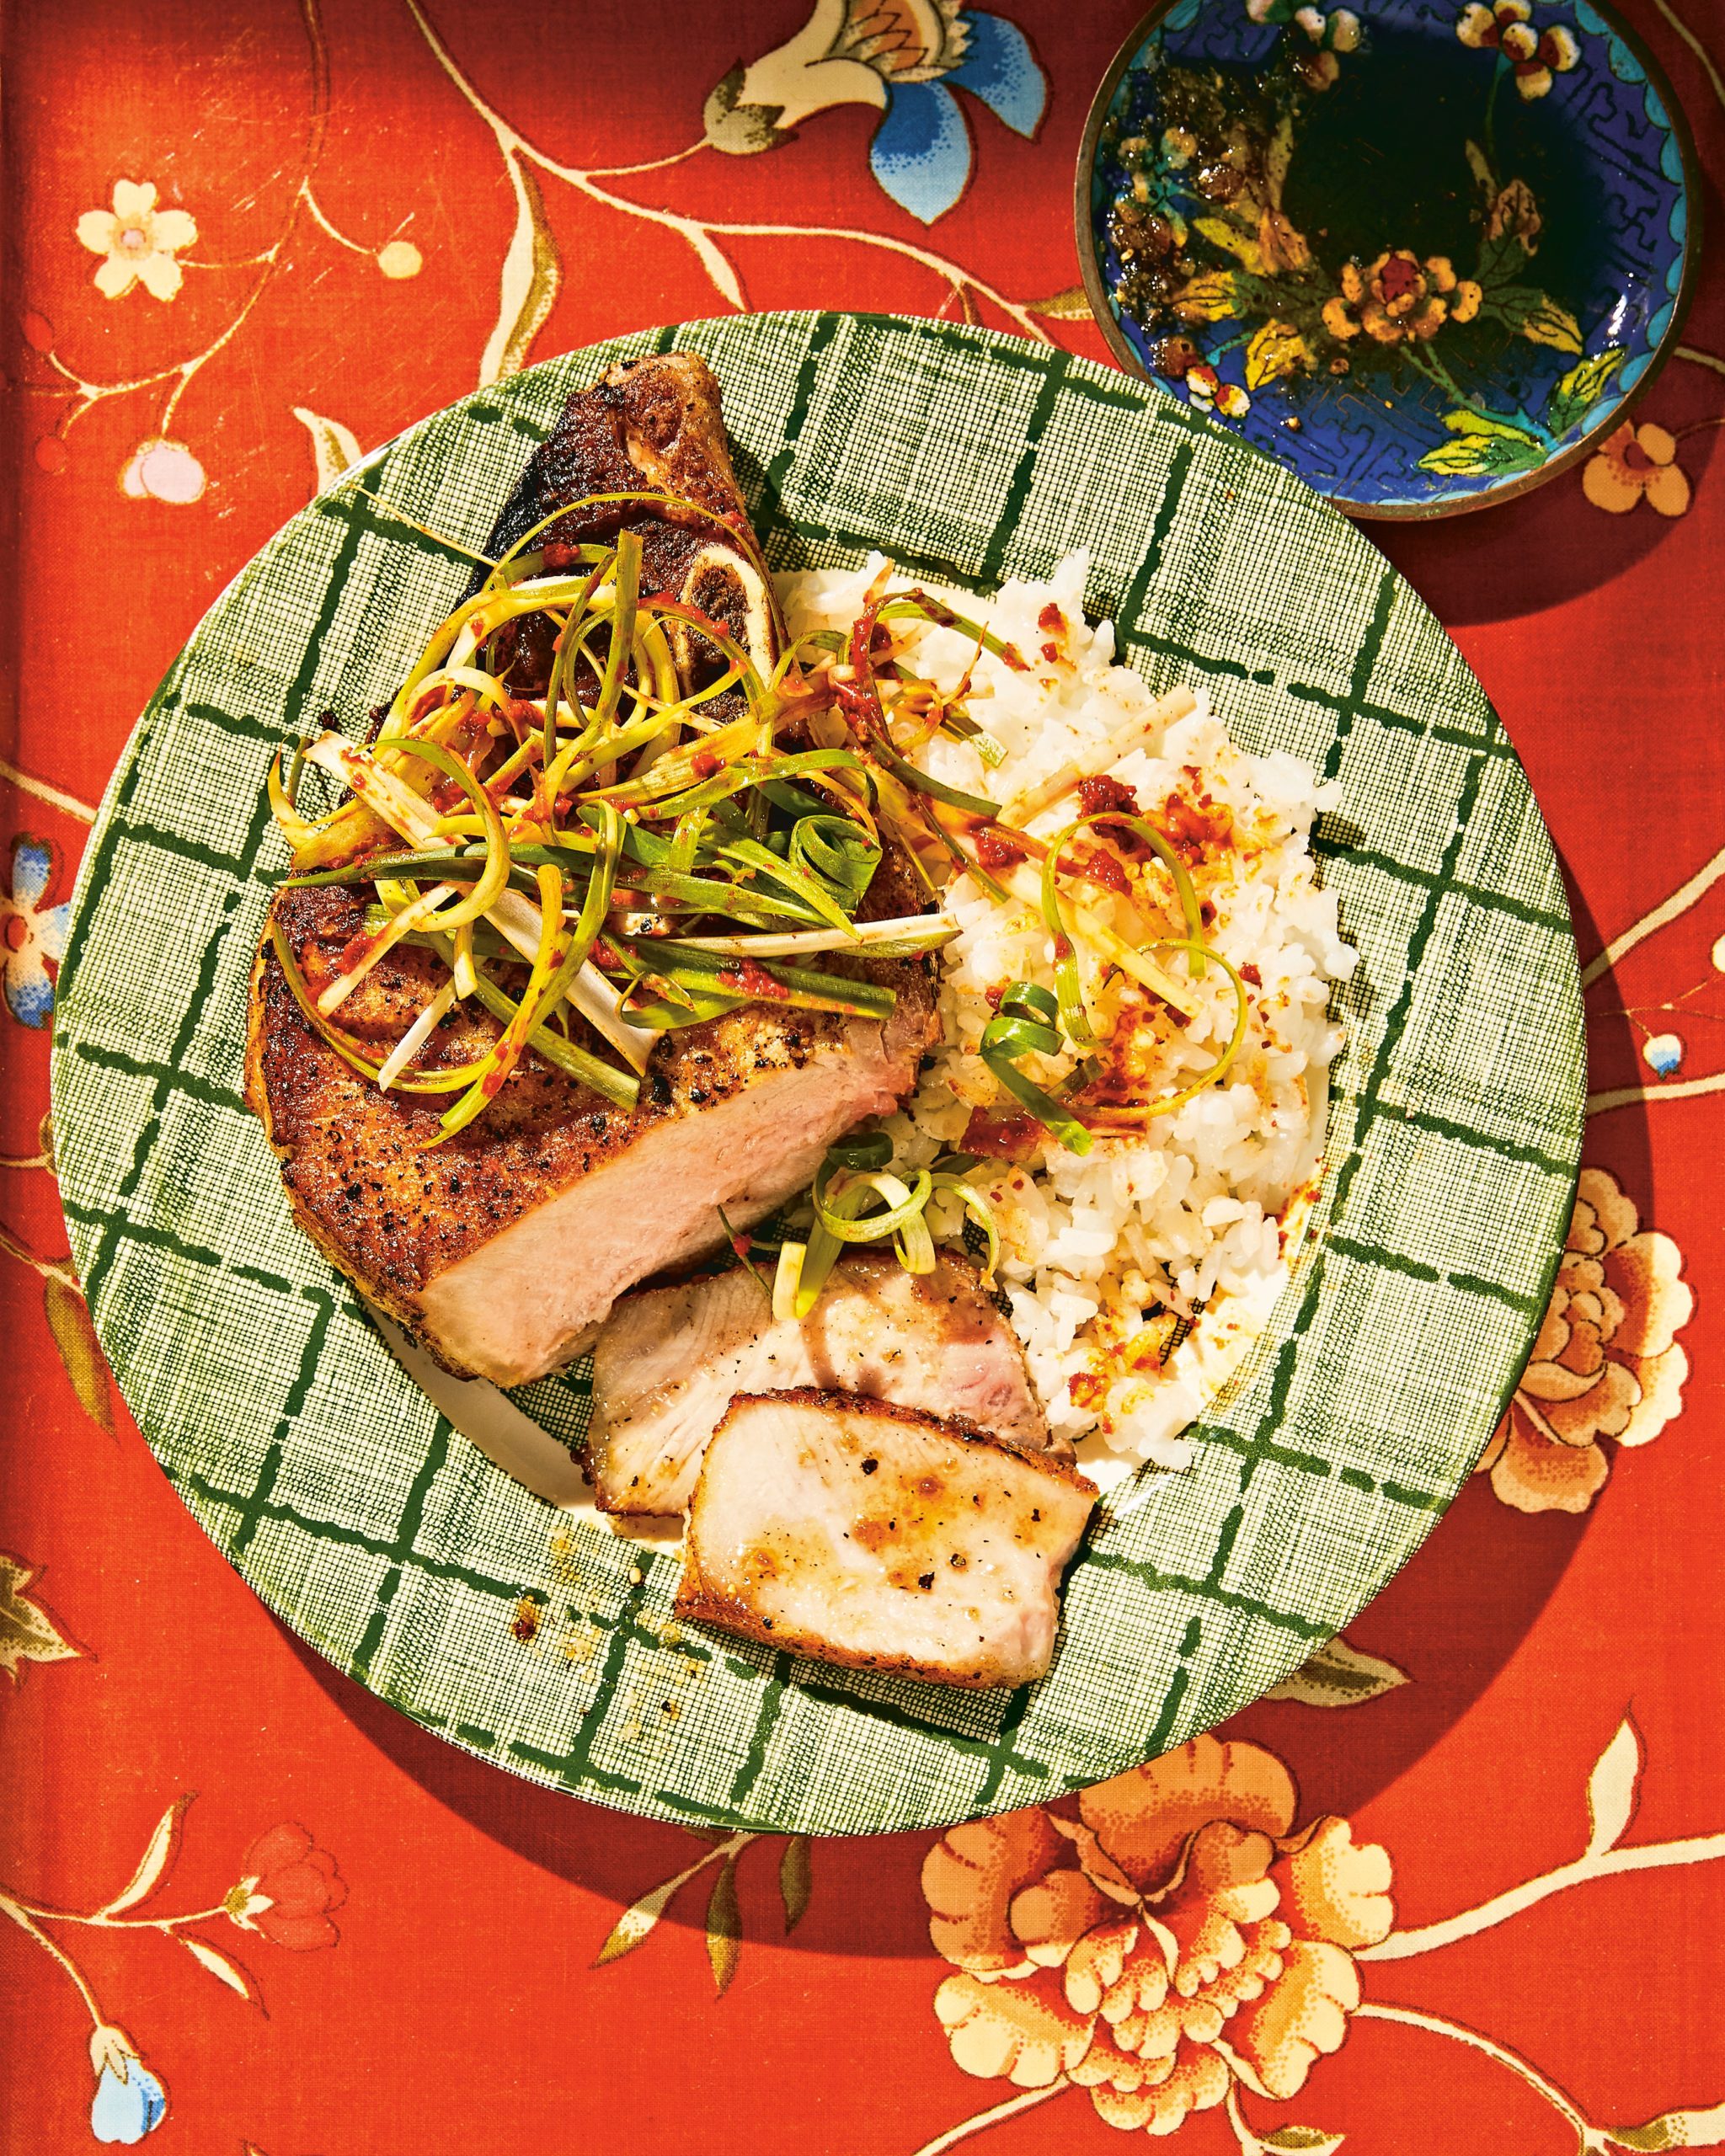 Salt-and-Pepper Pork Chops with Vinegared Scallions: A favorite recipe from Eric Kim's cookbook, Korean American: Food That Tastes Like Home | Didn't I Just Feed You podcast